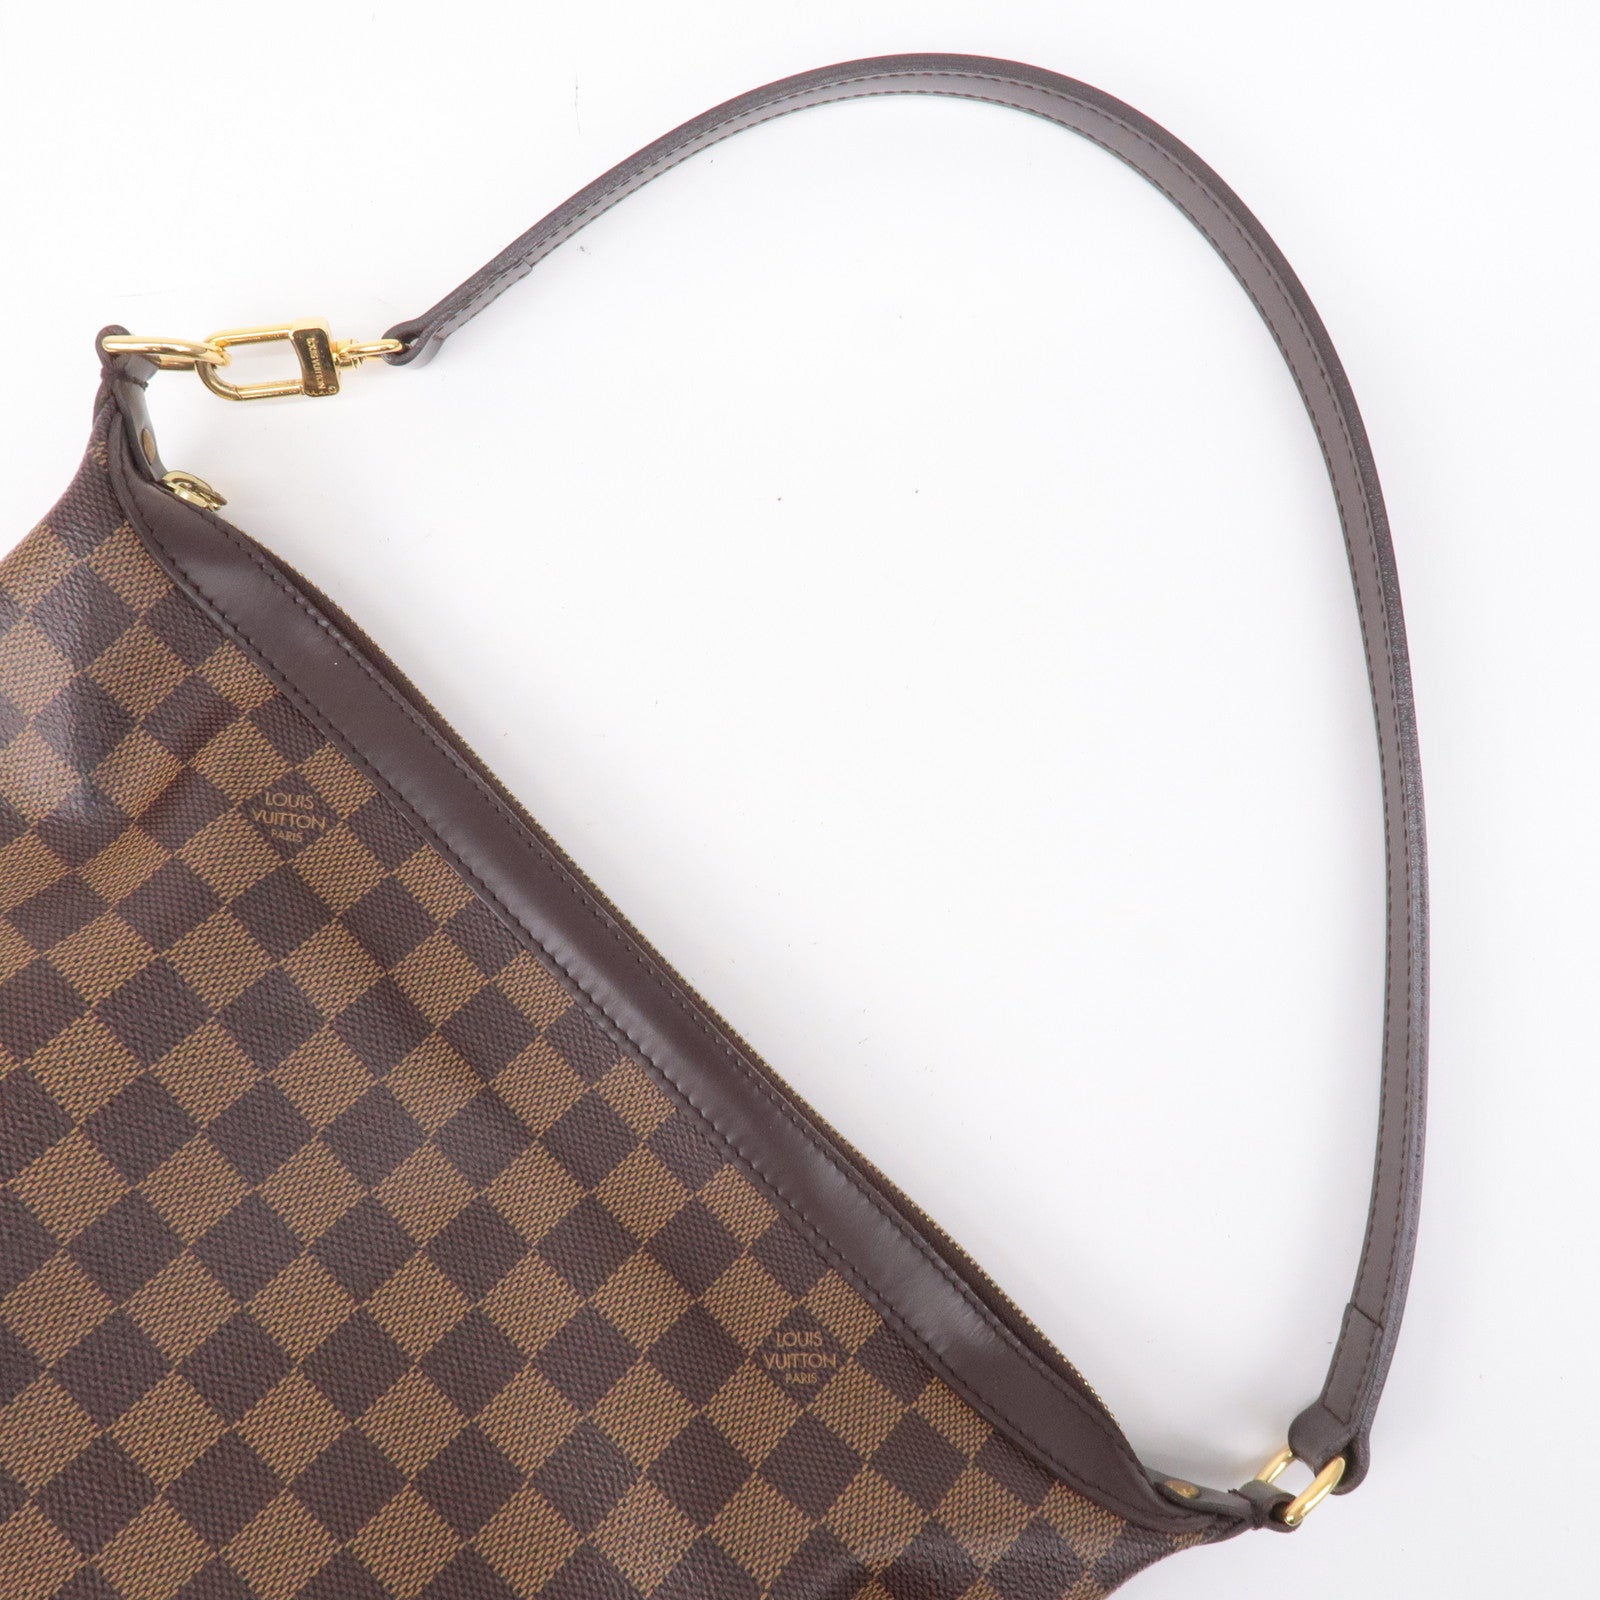 LOUIS VUITTON LV N51995 Damier Brown Leather Illovo MM Shoulder Bag Used